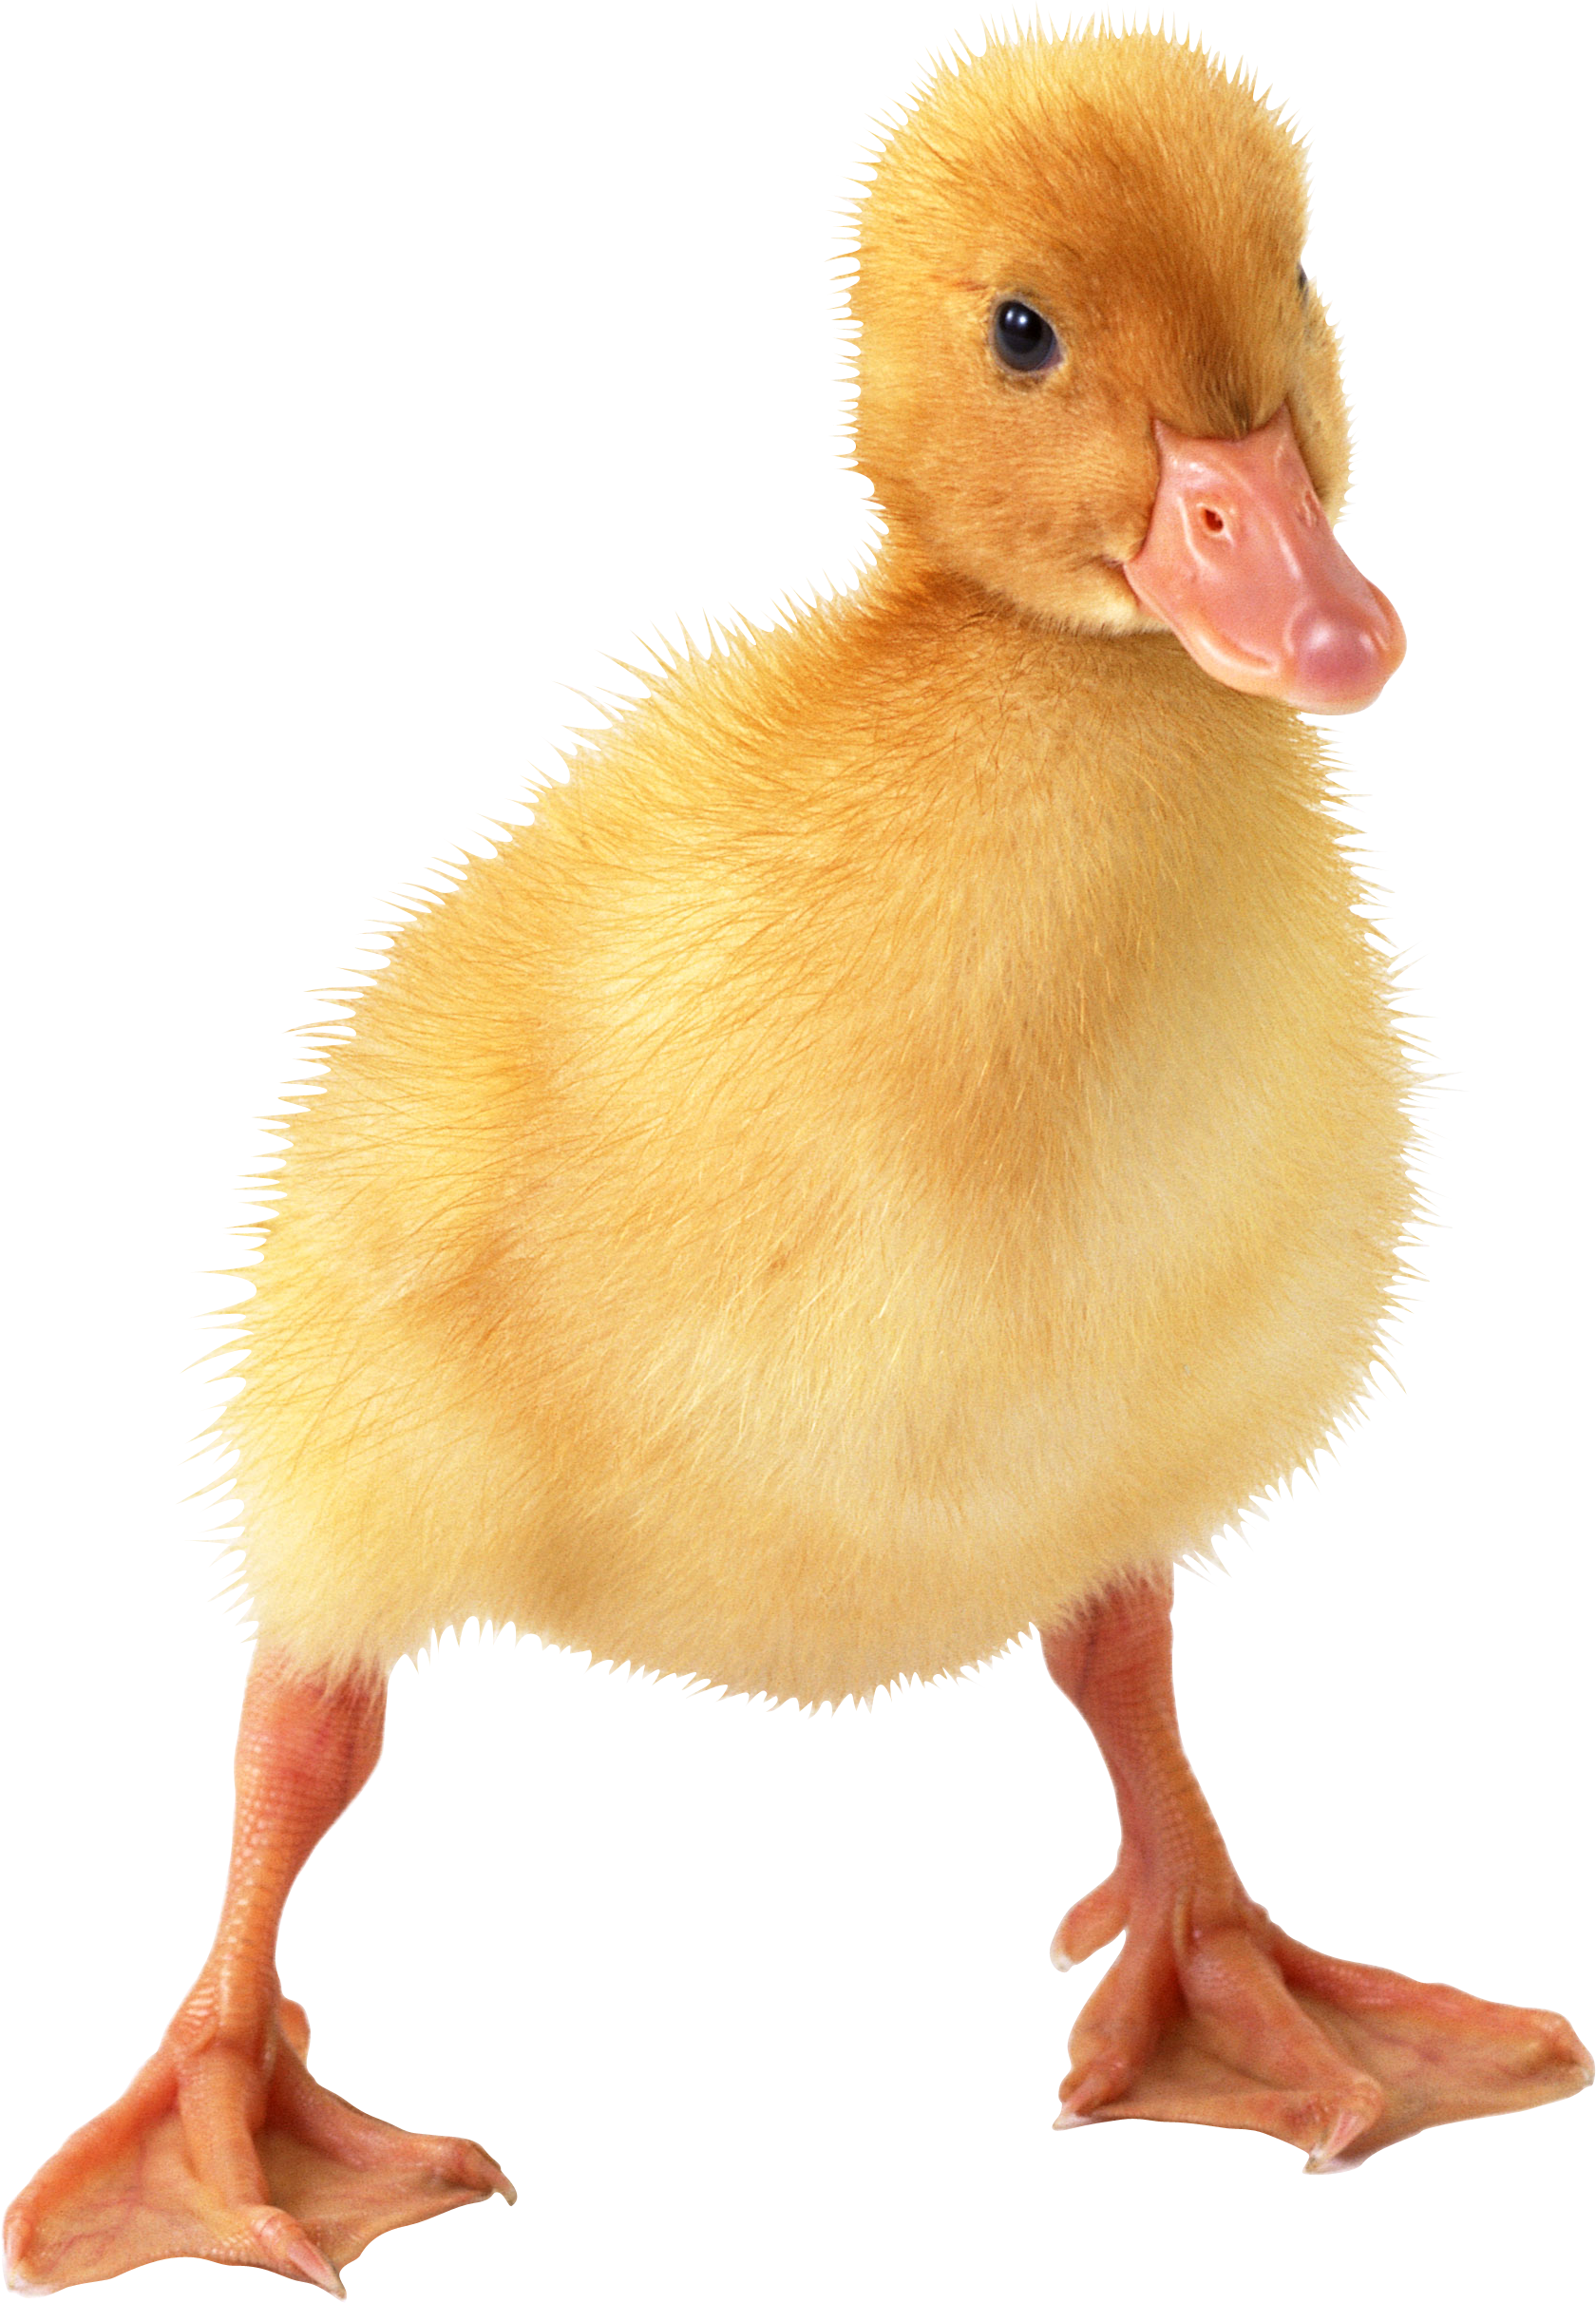 PNG Duckling - 84049